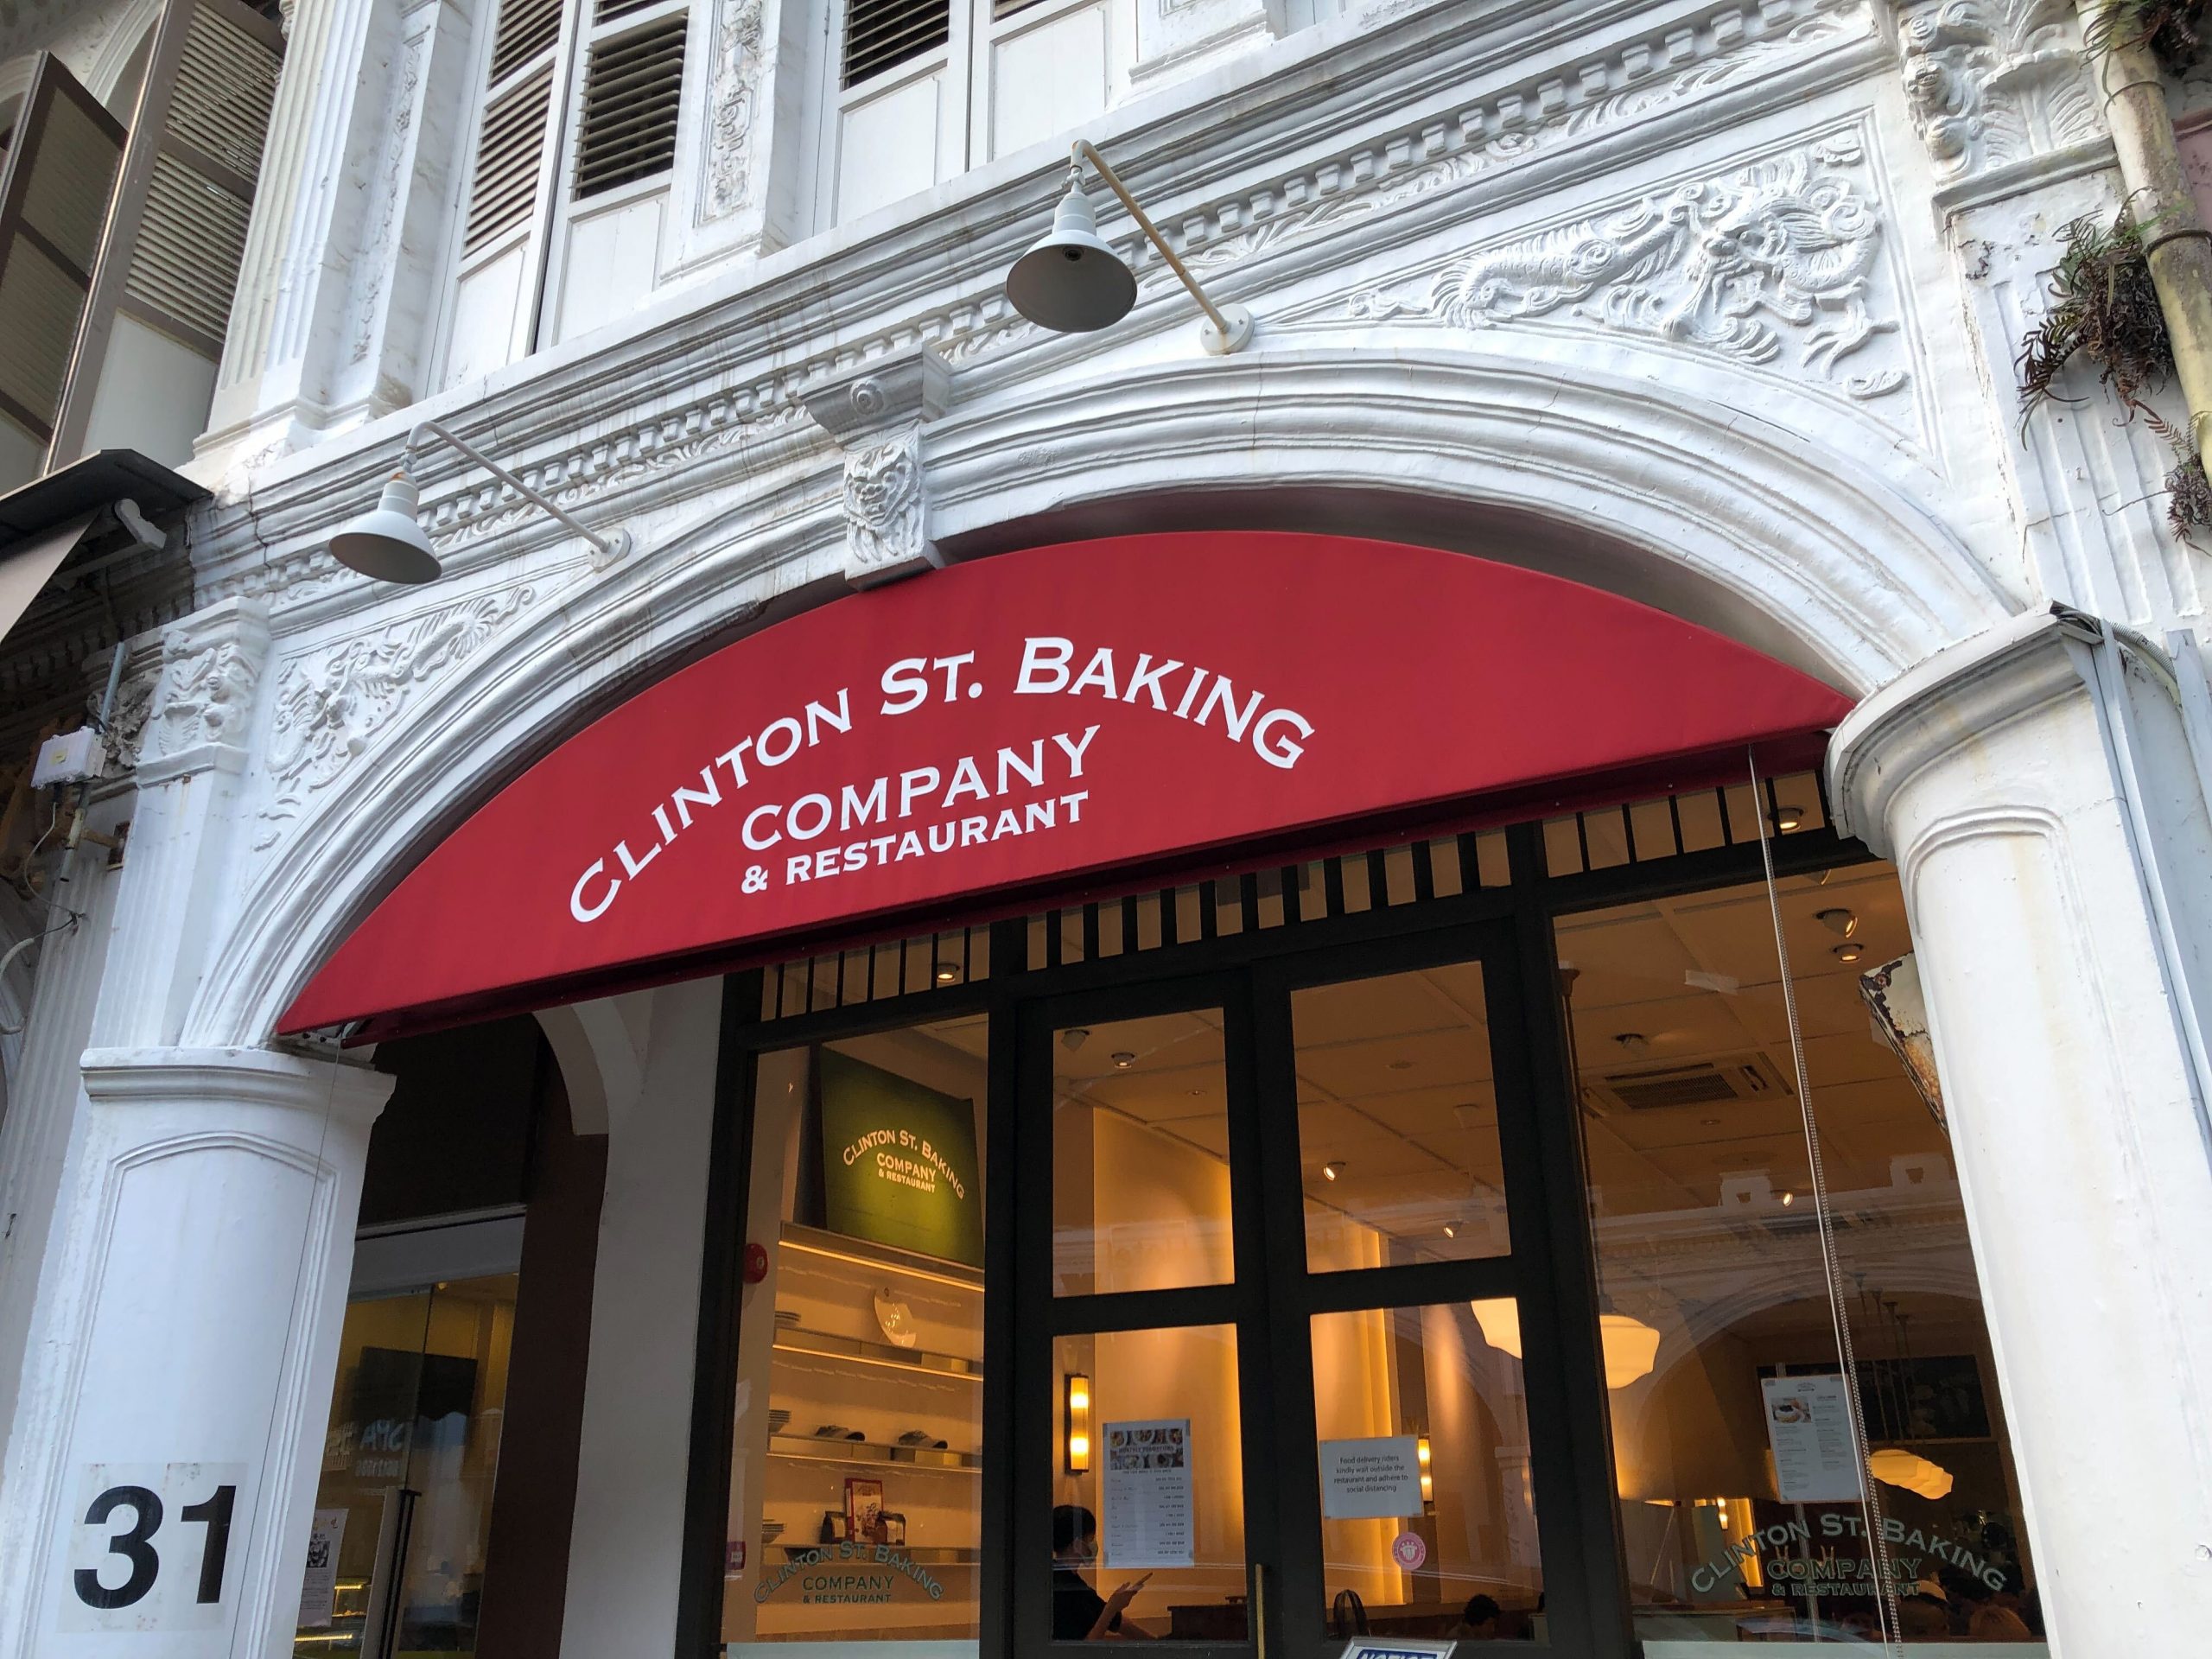 ‘Overwhelming support’ for Clinton St Baking after news of closure; walk-ins still possible till Aug 30